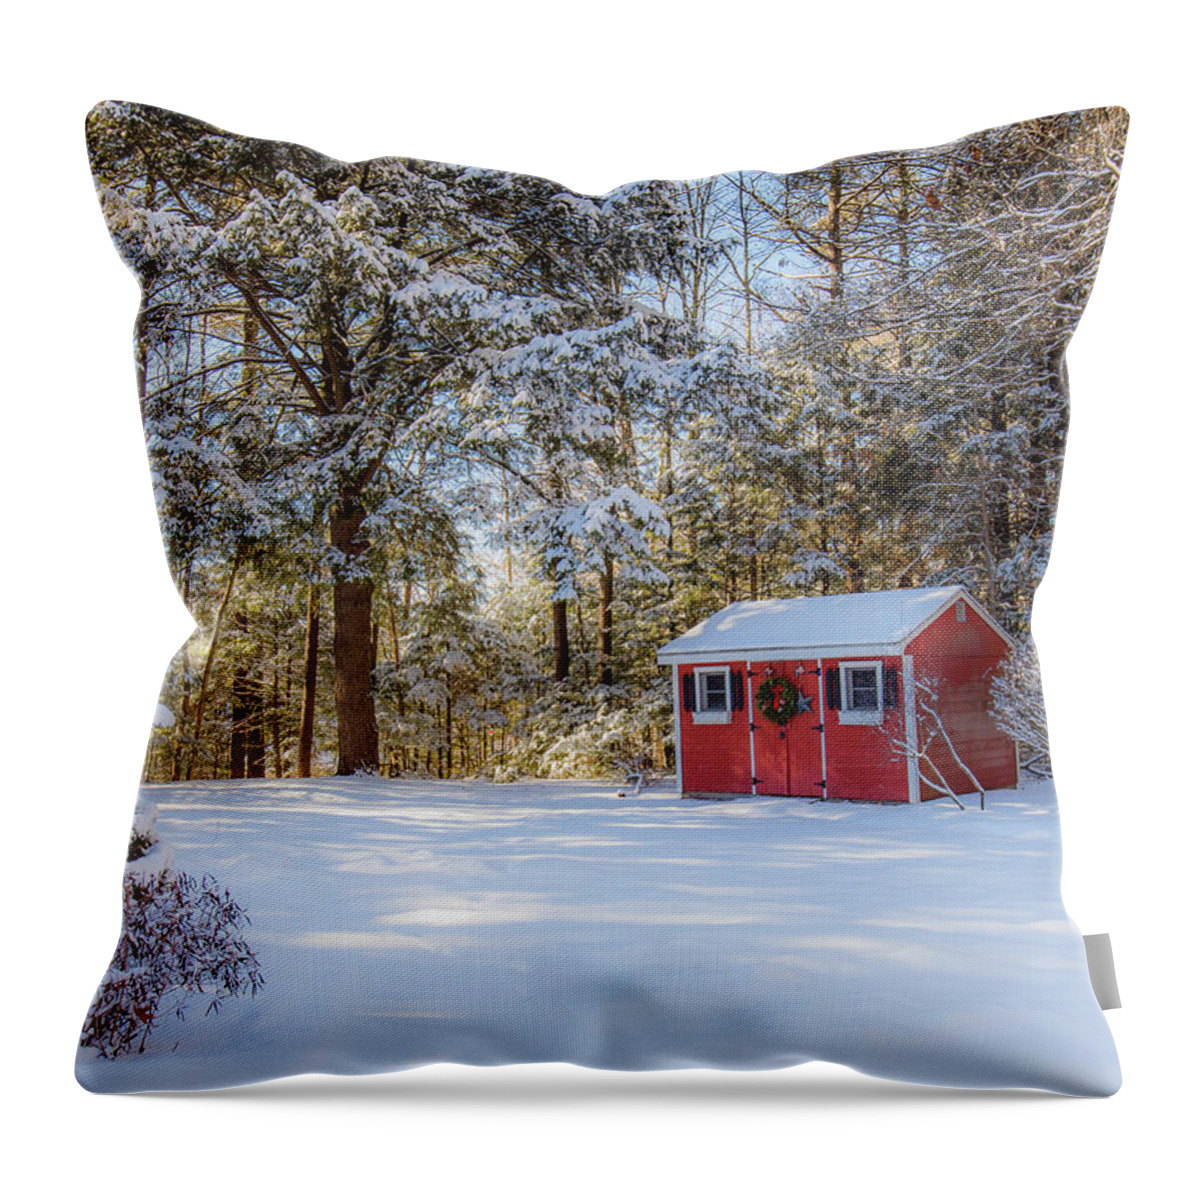 Snow Throw Pillow featuring the photograph Snowy Morning by Debbie Gracy